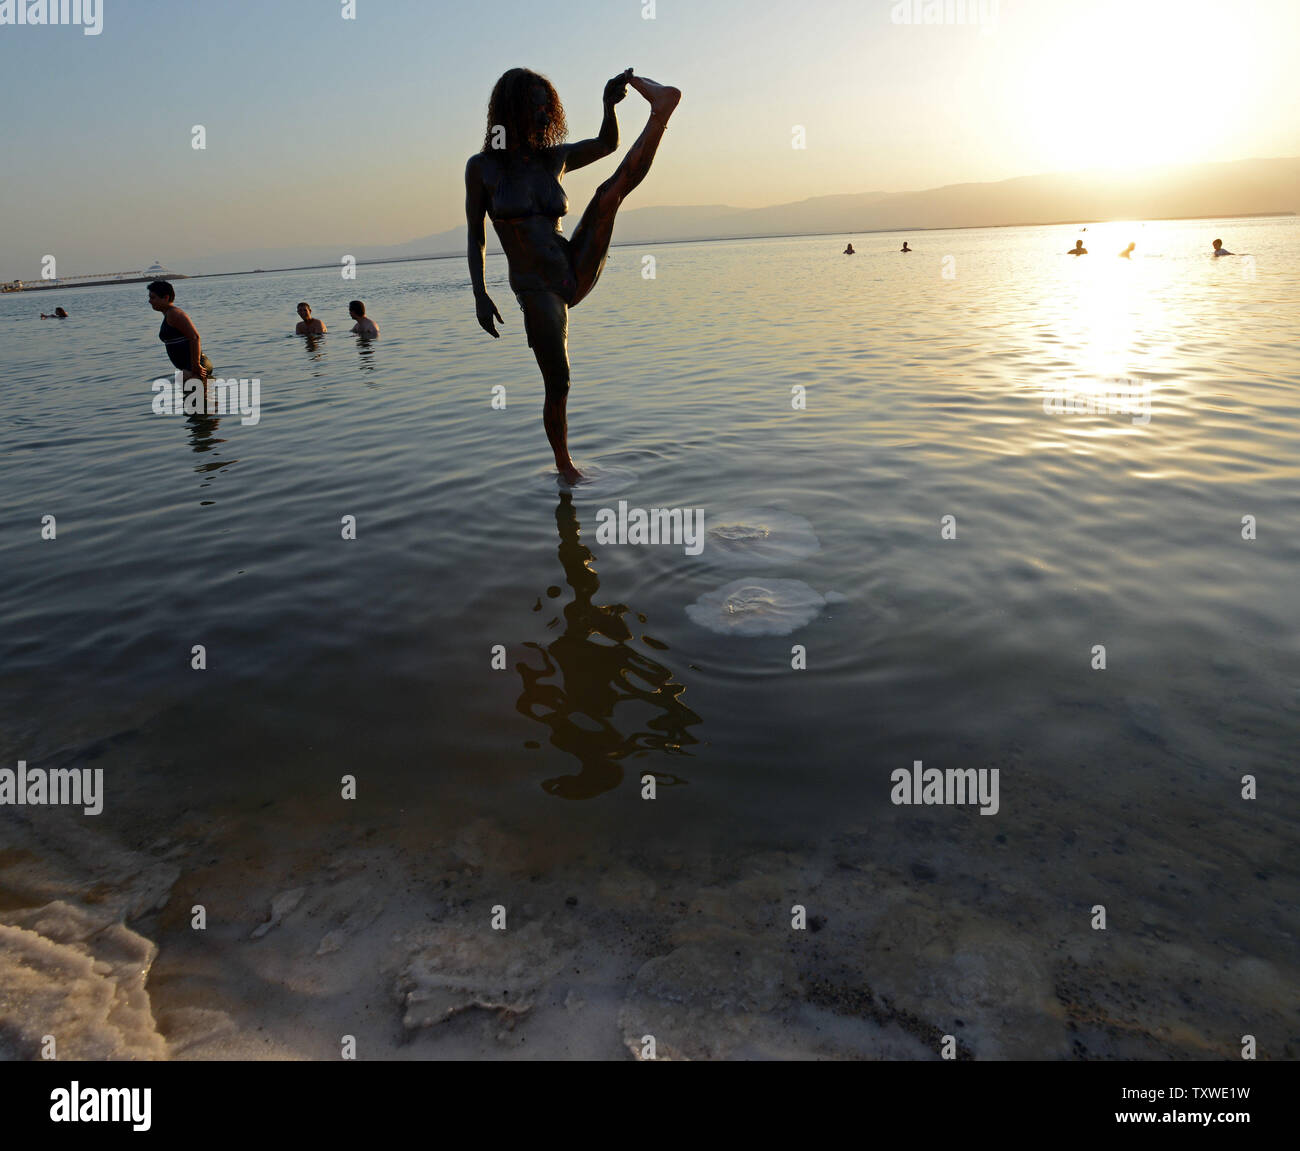 An Israeli does a yoga pose on a salt crust in the Dead Sea during an Israeli and international environmental and social  protest float at dawn against the deterioration of the Dead Sea,  Ein Bokek, Israel, September 14, 2012.  The  event was organized by U.S. photographer Spencer Tunick.  UPI/Debbie Hill Stock Photo